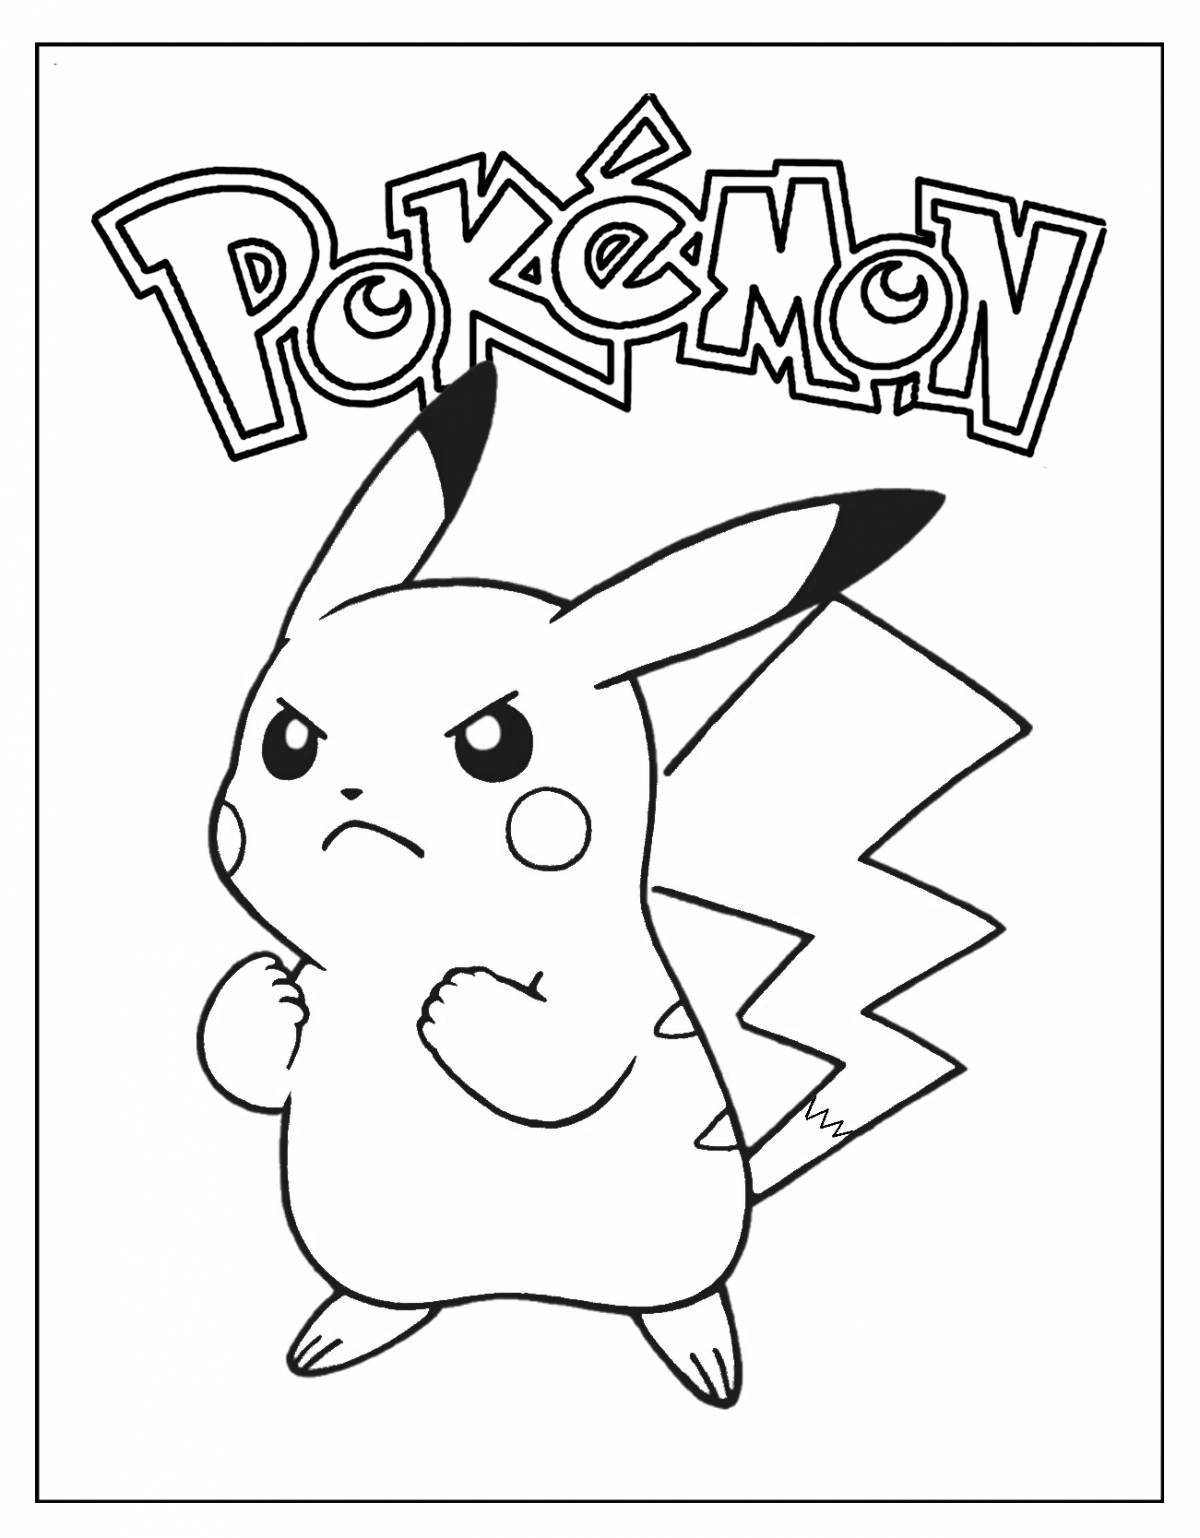 Pikachu funny coloring book